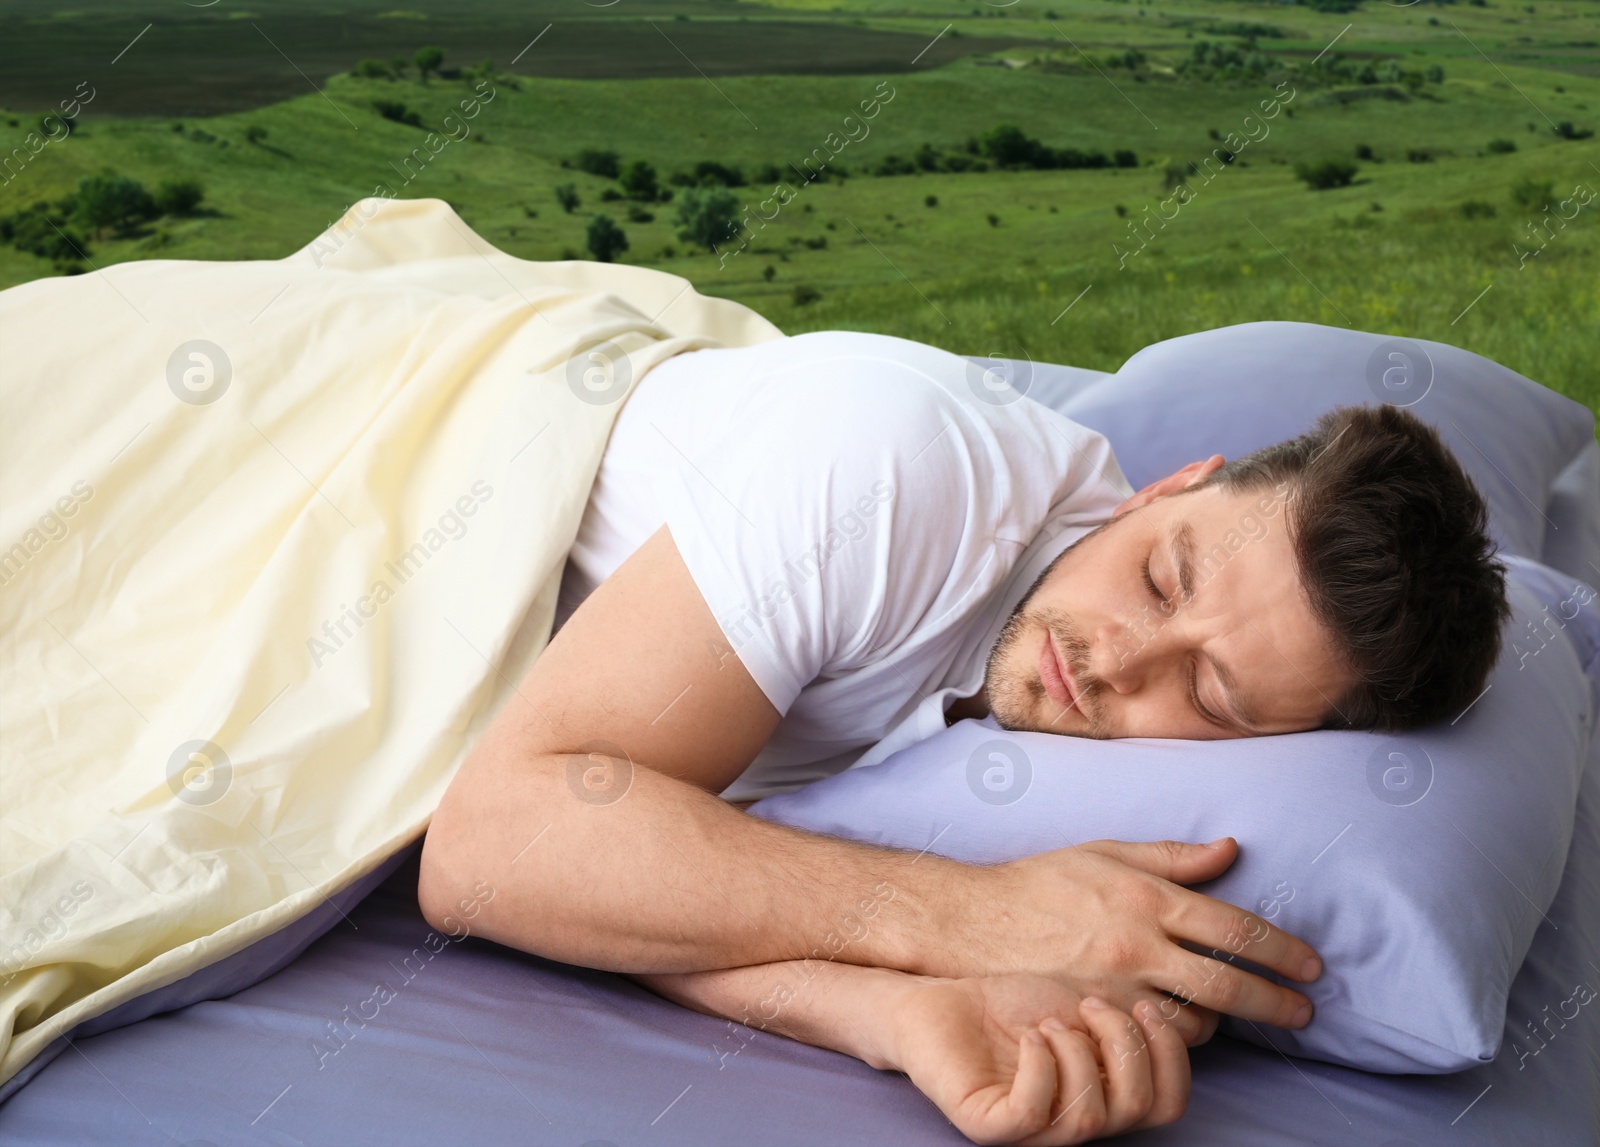 Image of Man sleeping in bed and beautiful view of green lawn on background. Sleep well - stay healthy